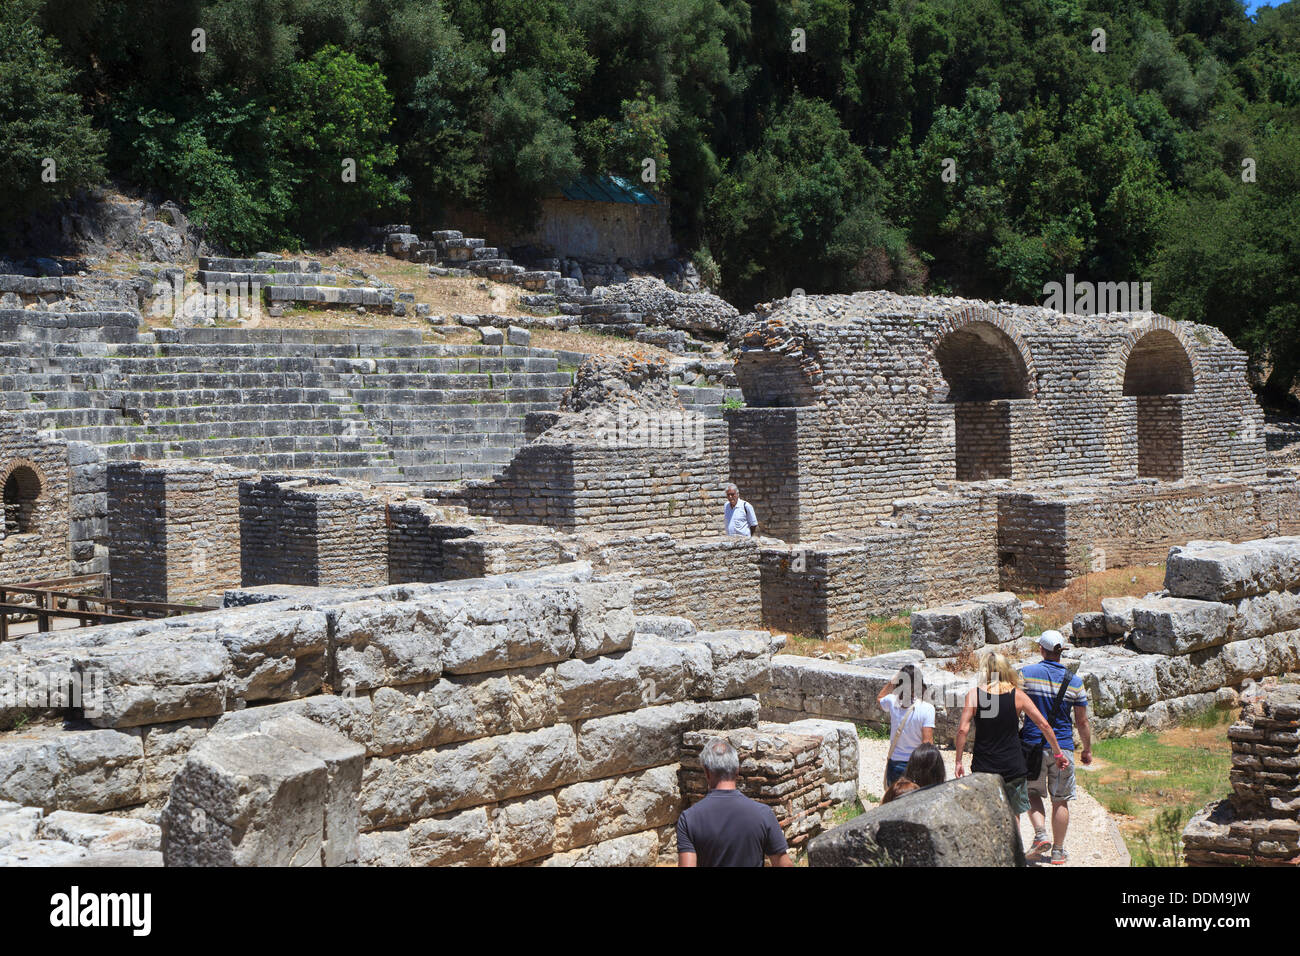 Tourists walking through the remains of the ancient Greek and Roman town at Butrint Albania Stock Photo